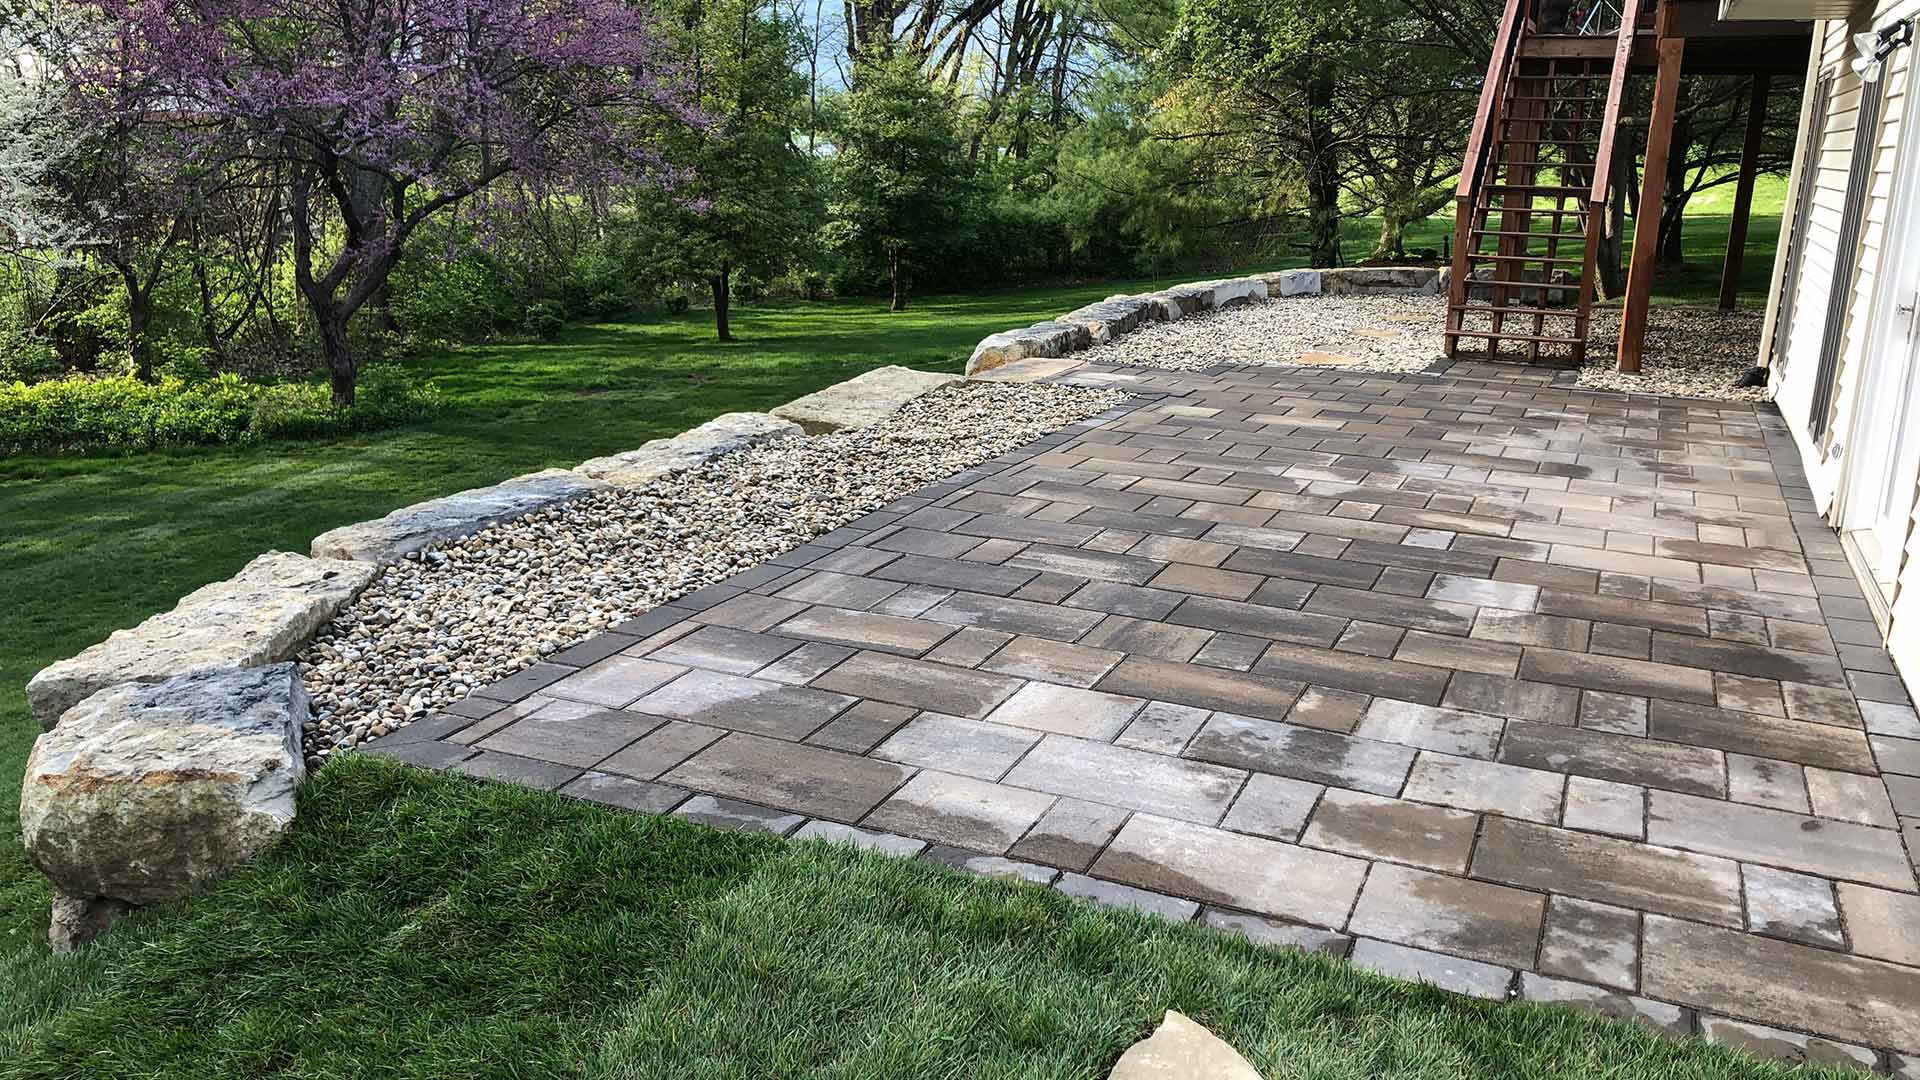 Edwardsville Backyard Makeover with Custom Patio, Retaining Wall, Steps & More